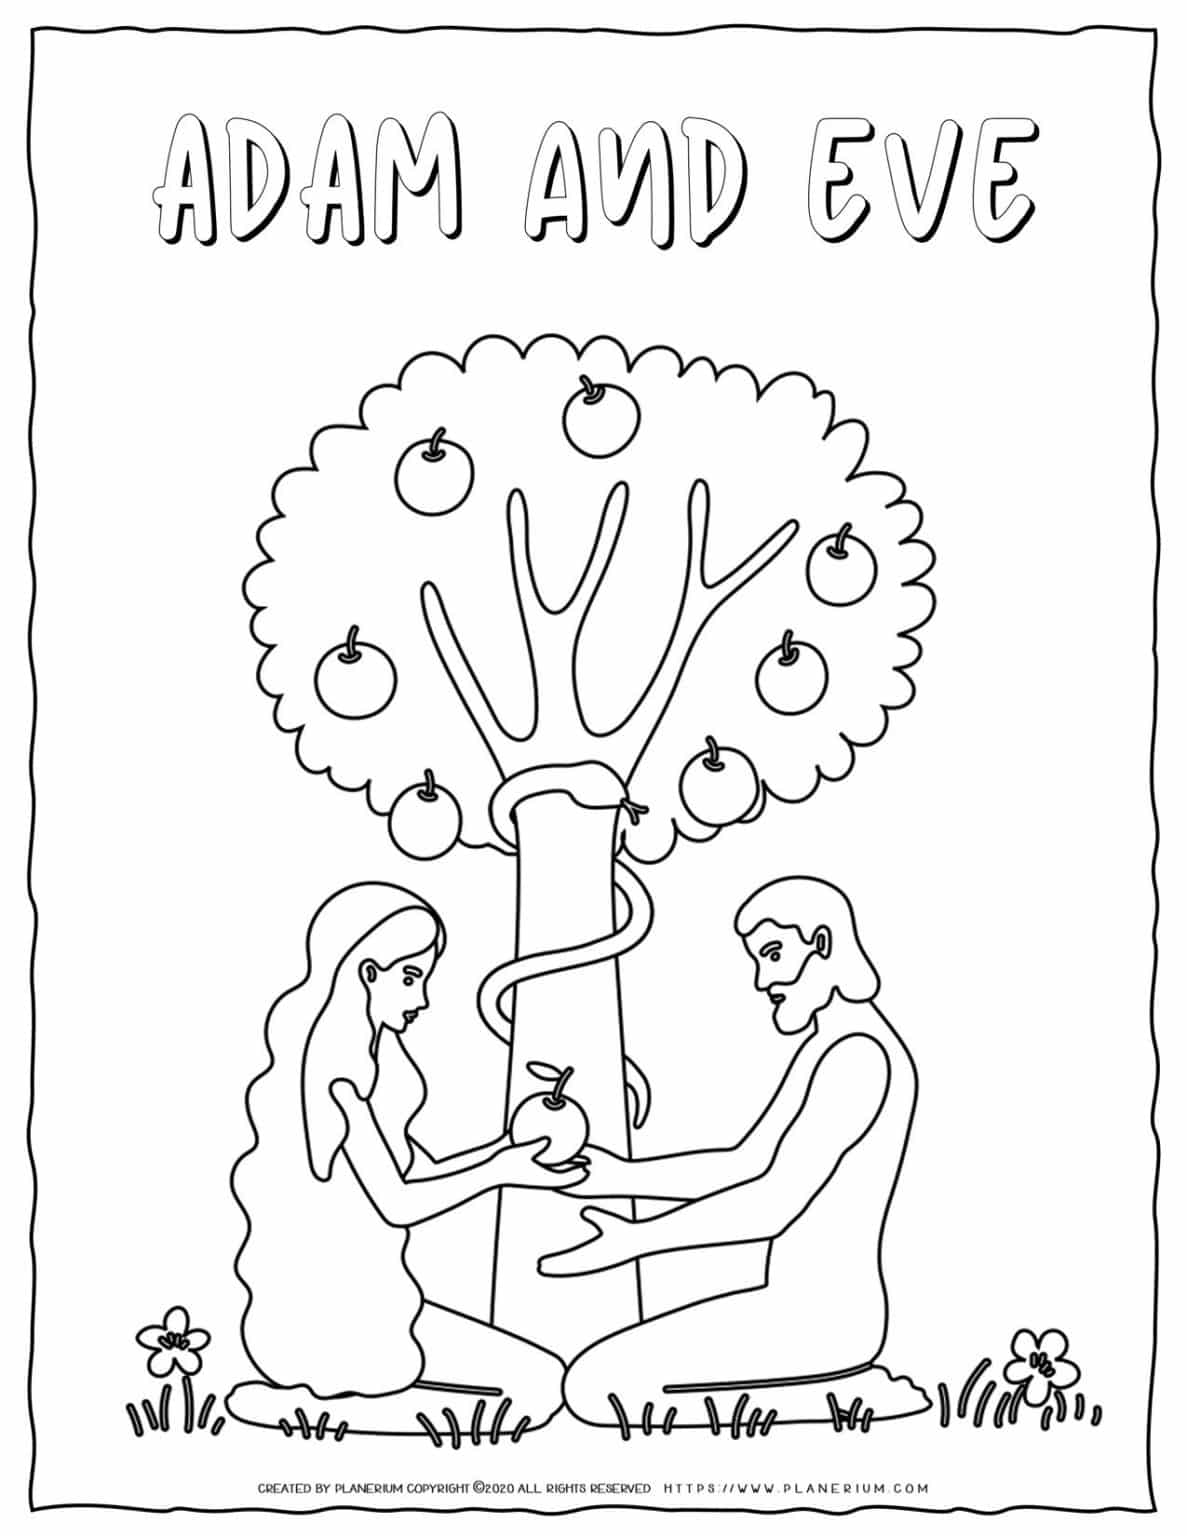 review-of-adam-and-eve-coloring-page-references-demianak-bond